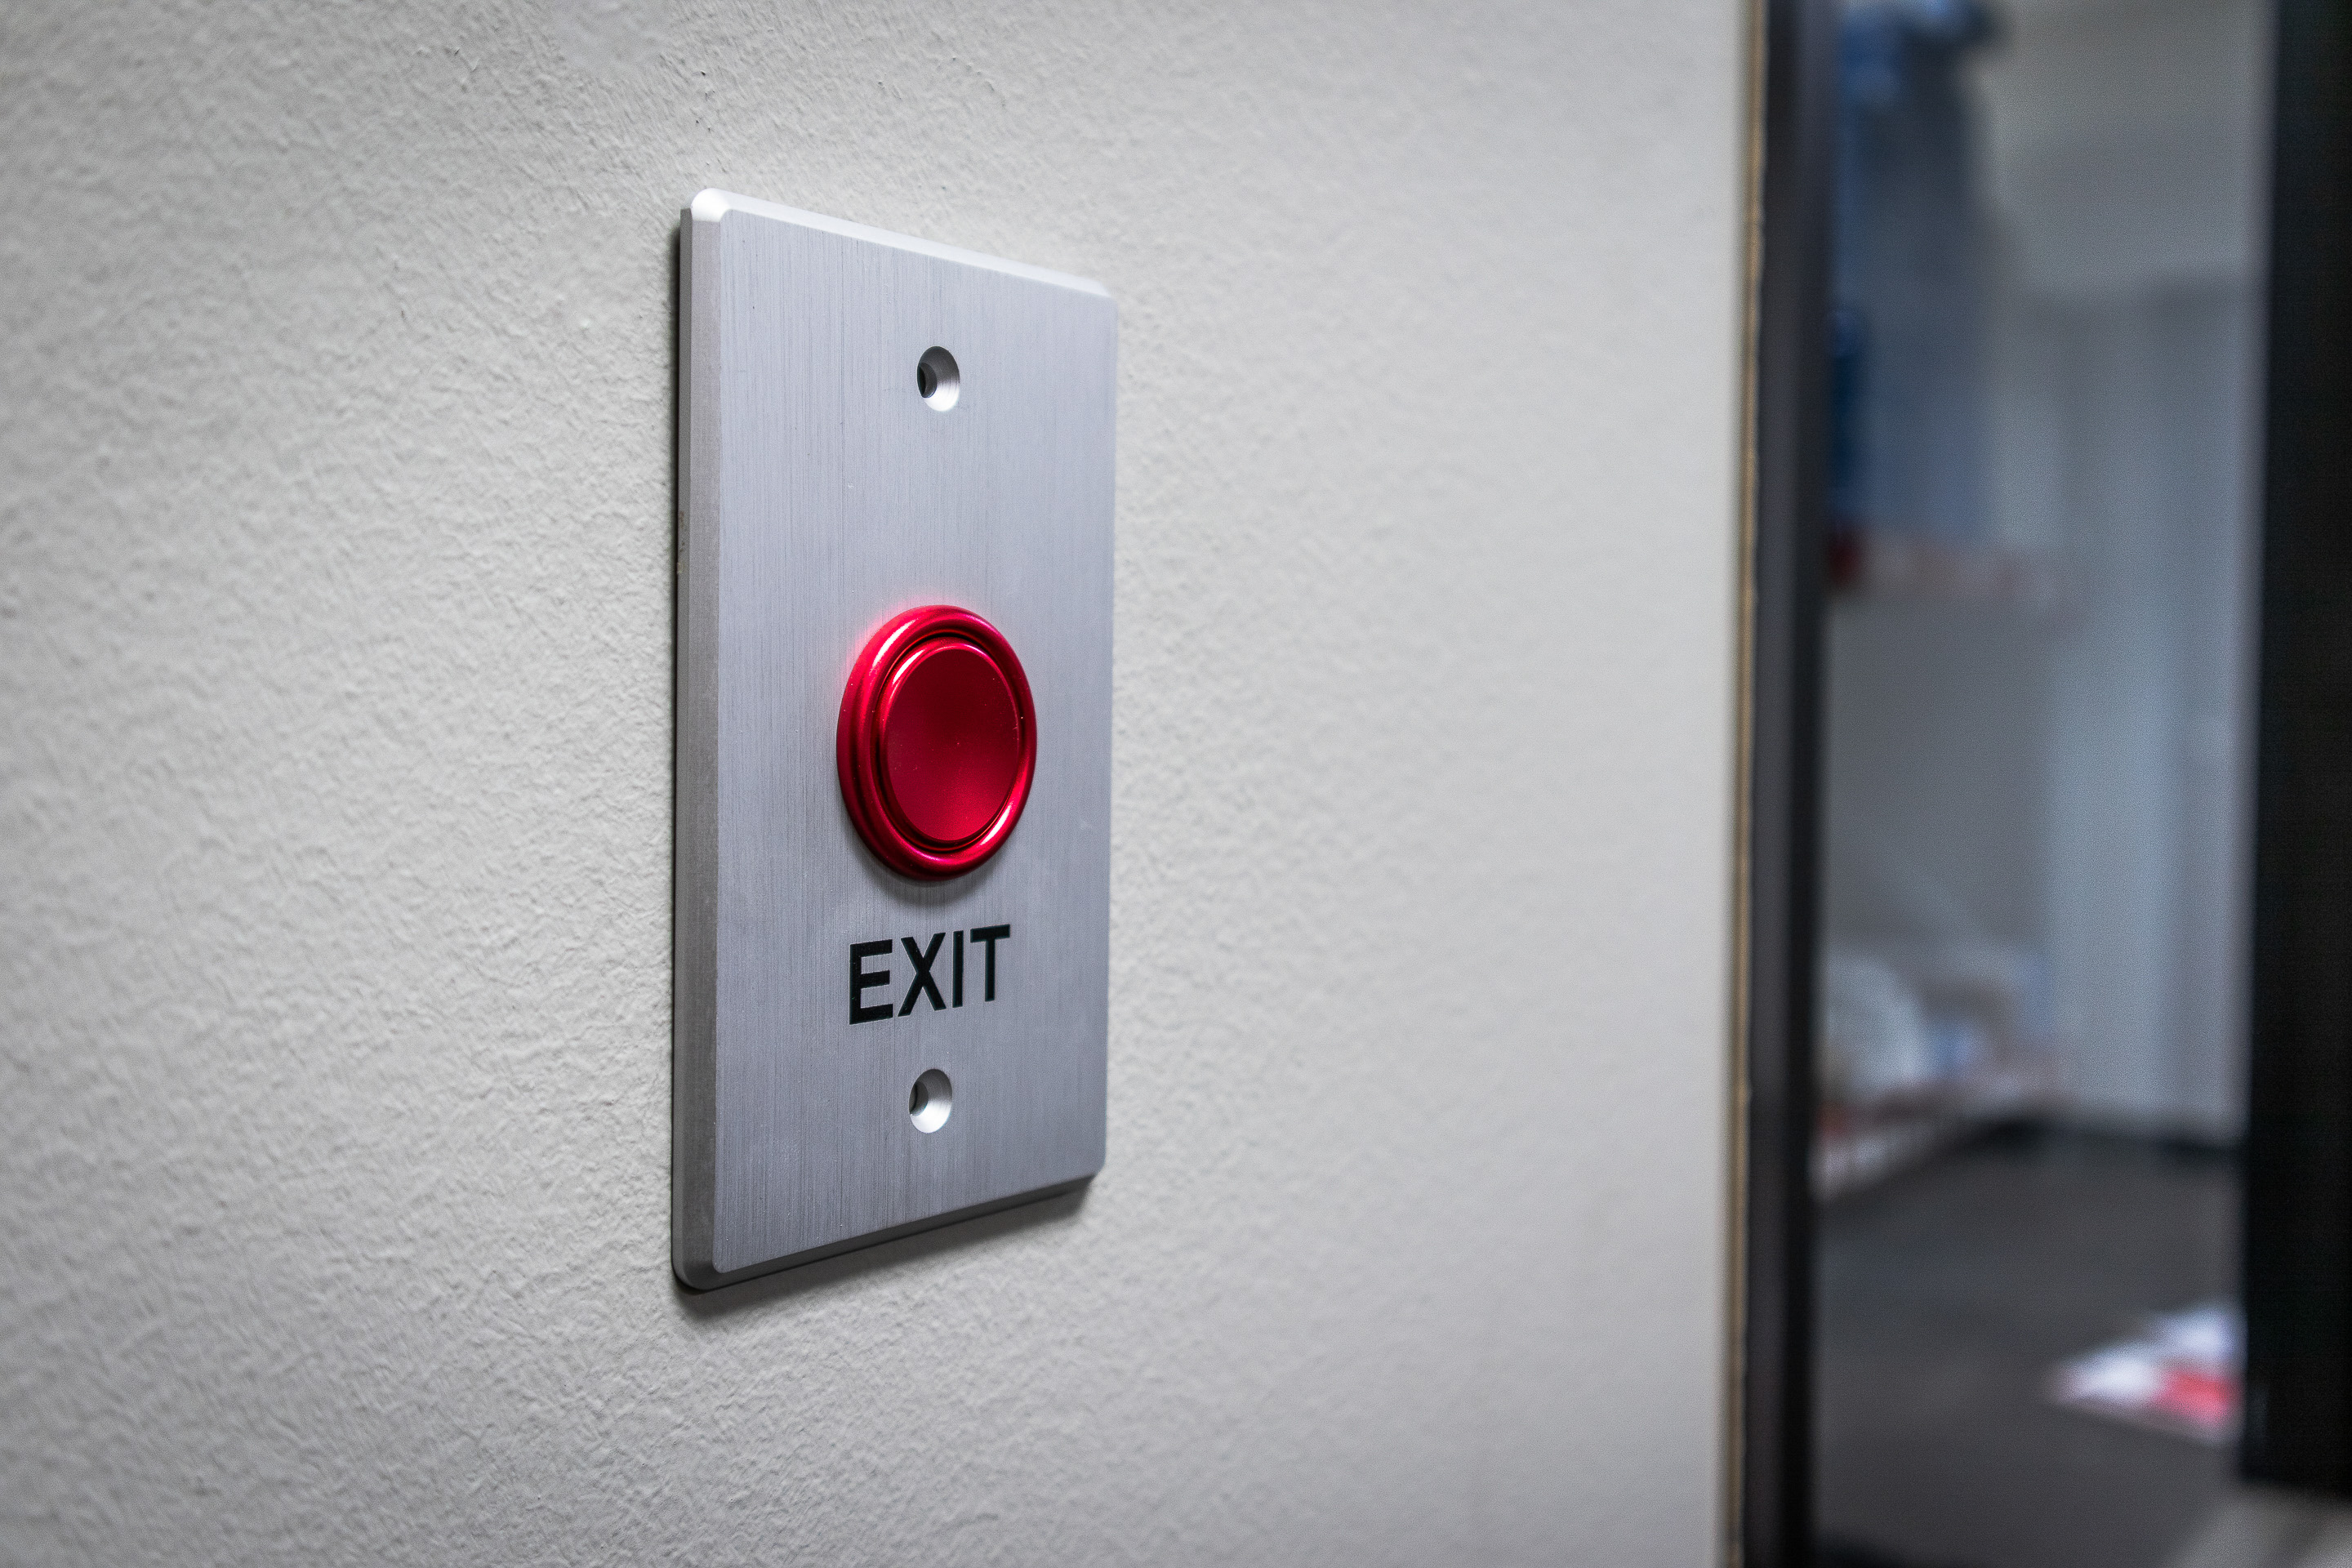 A keypad allows people into a restricted area based on input credentials.